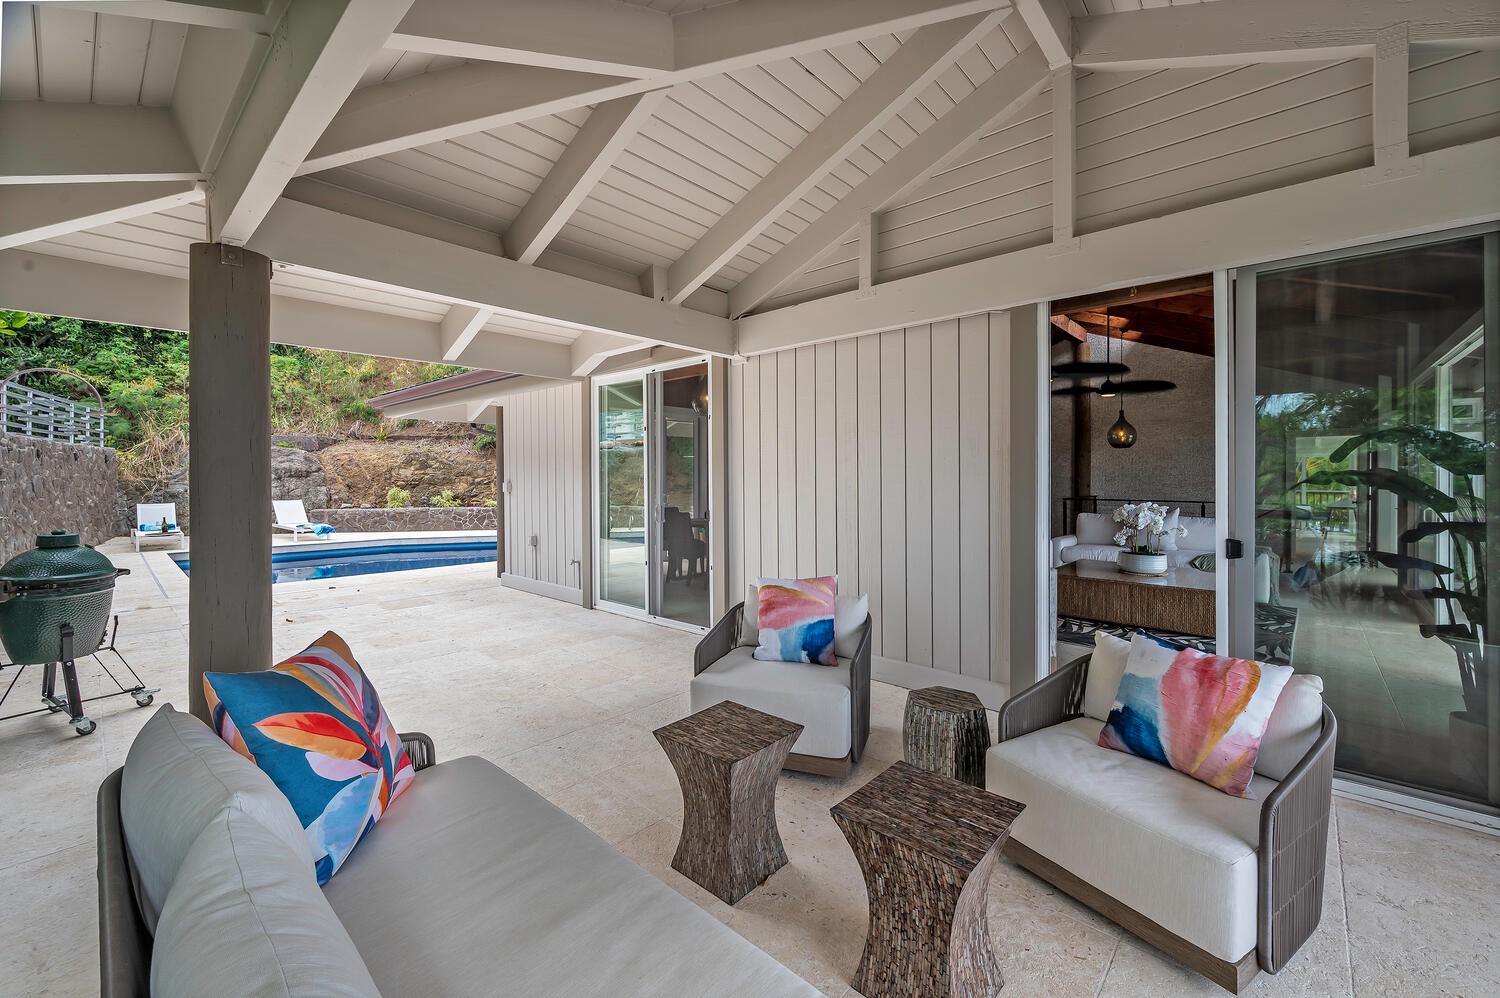 Kailua Vacation Rentals, Hale Lani - Covered outdoor lanai by the pool